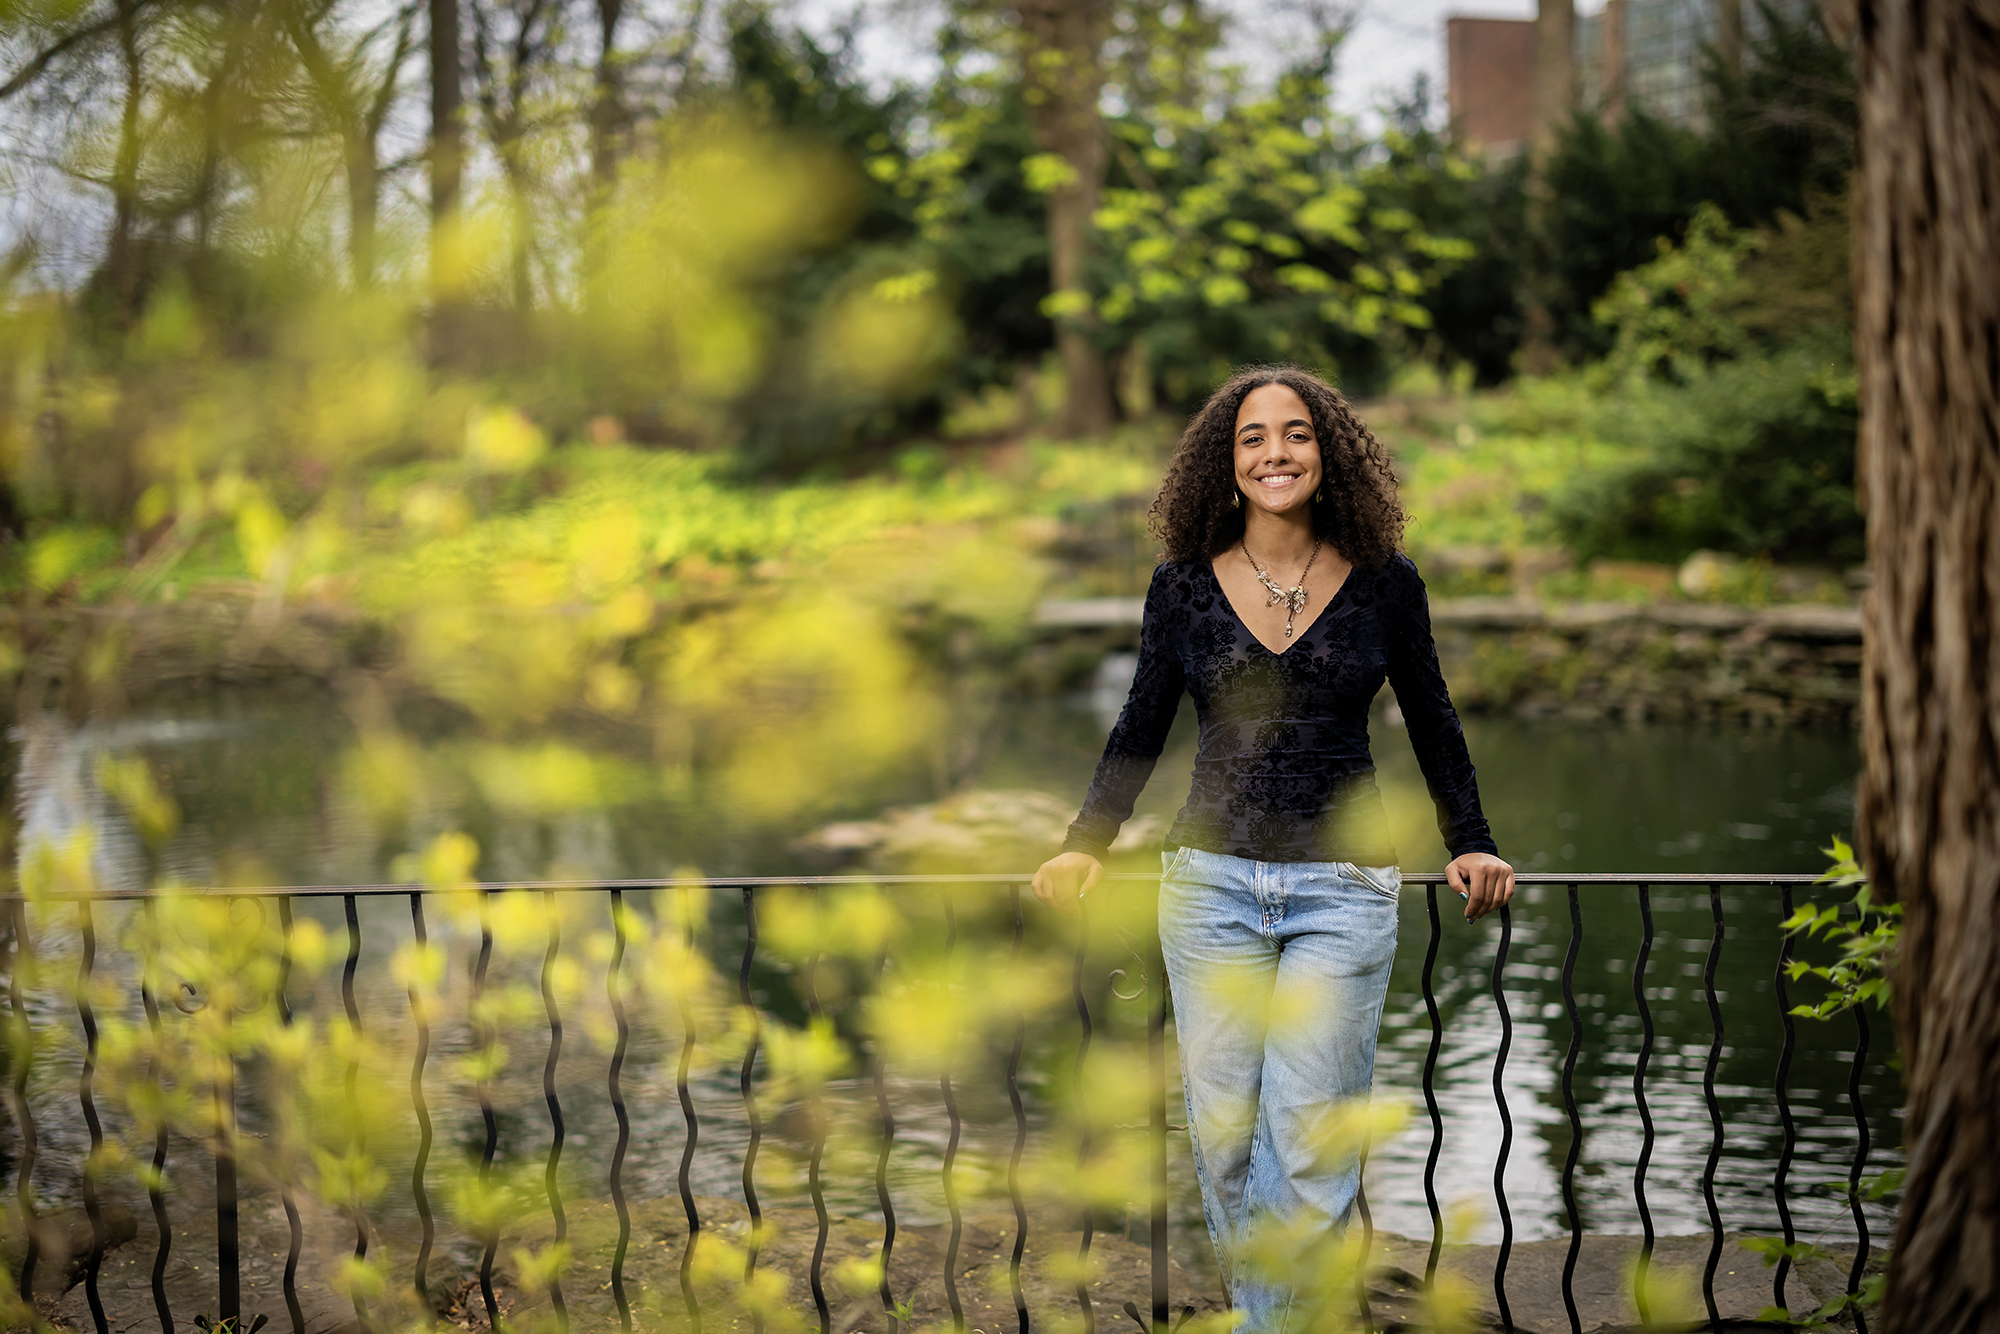 Mya Gordon leans against a fence at the biopond, with spring foliage in the foreground